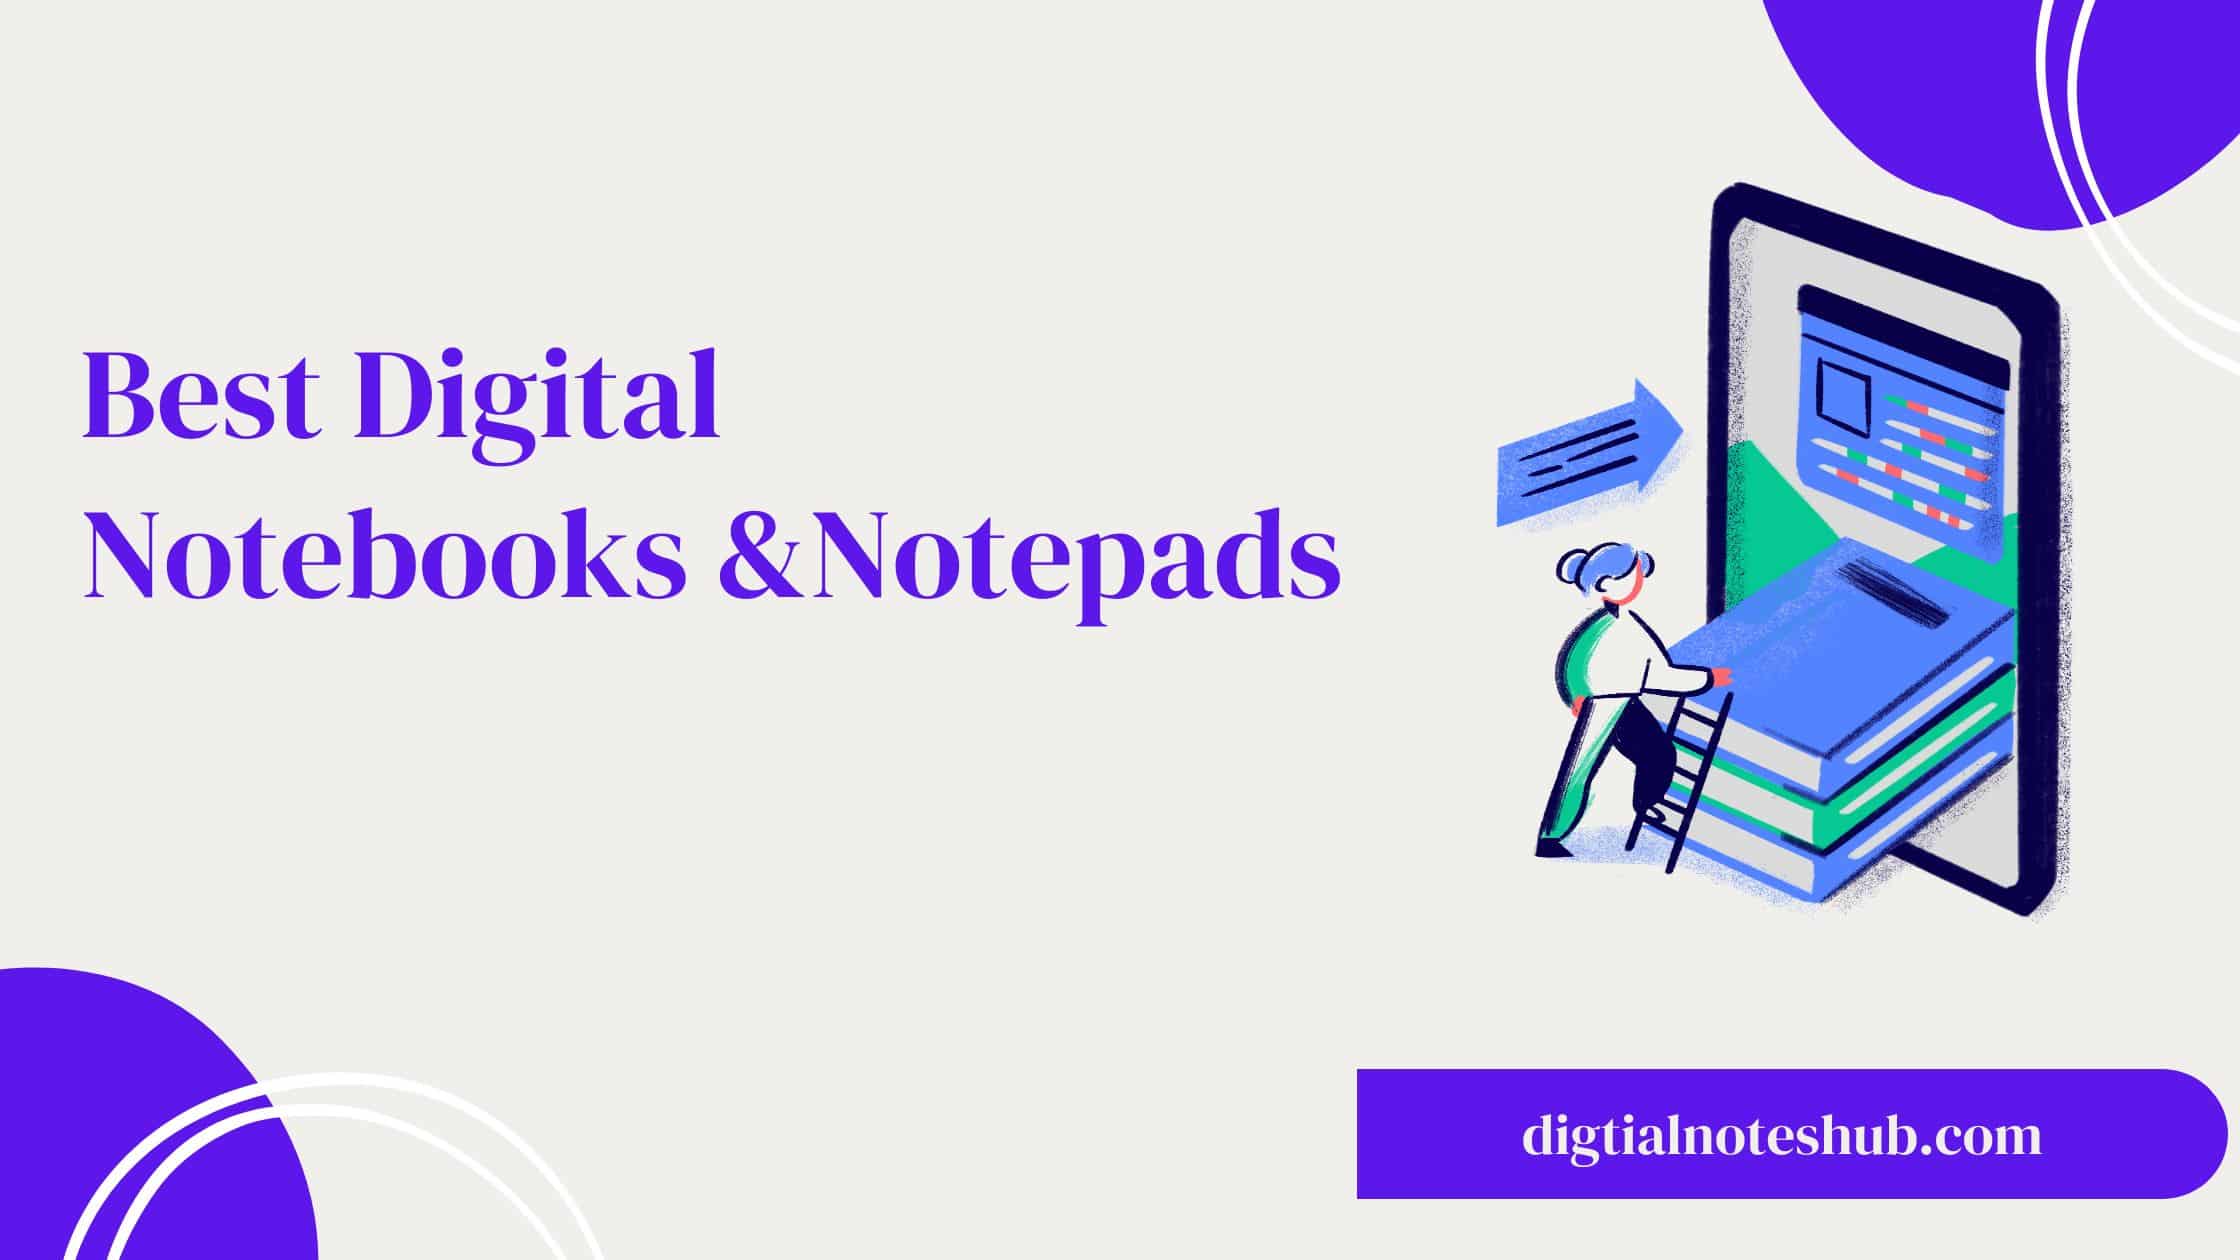 Best digital notebooks and notepads